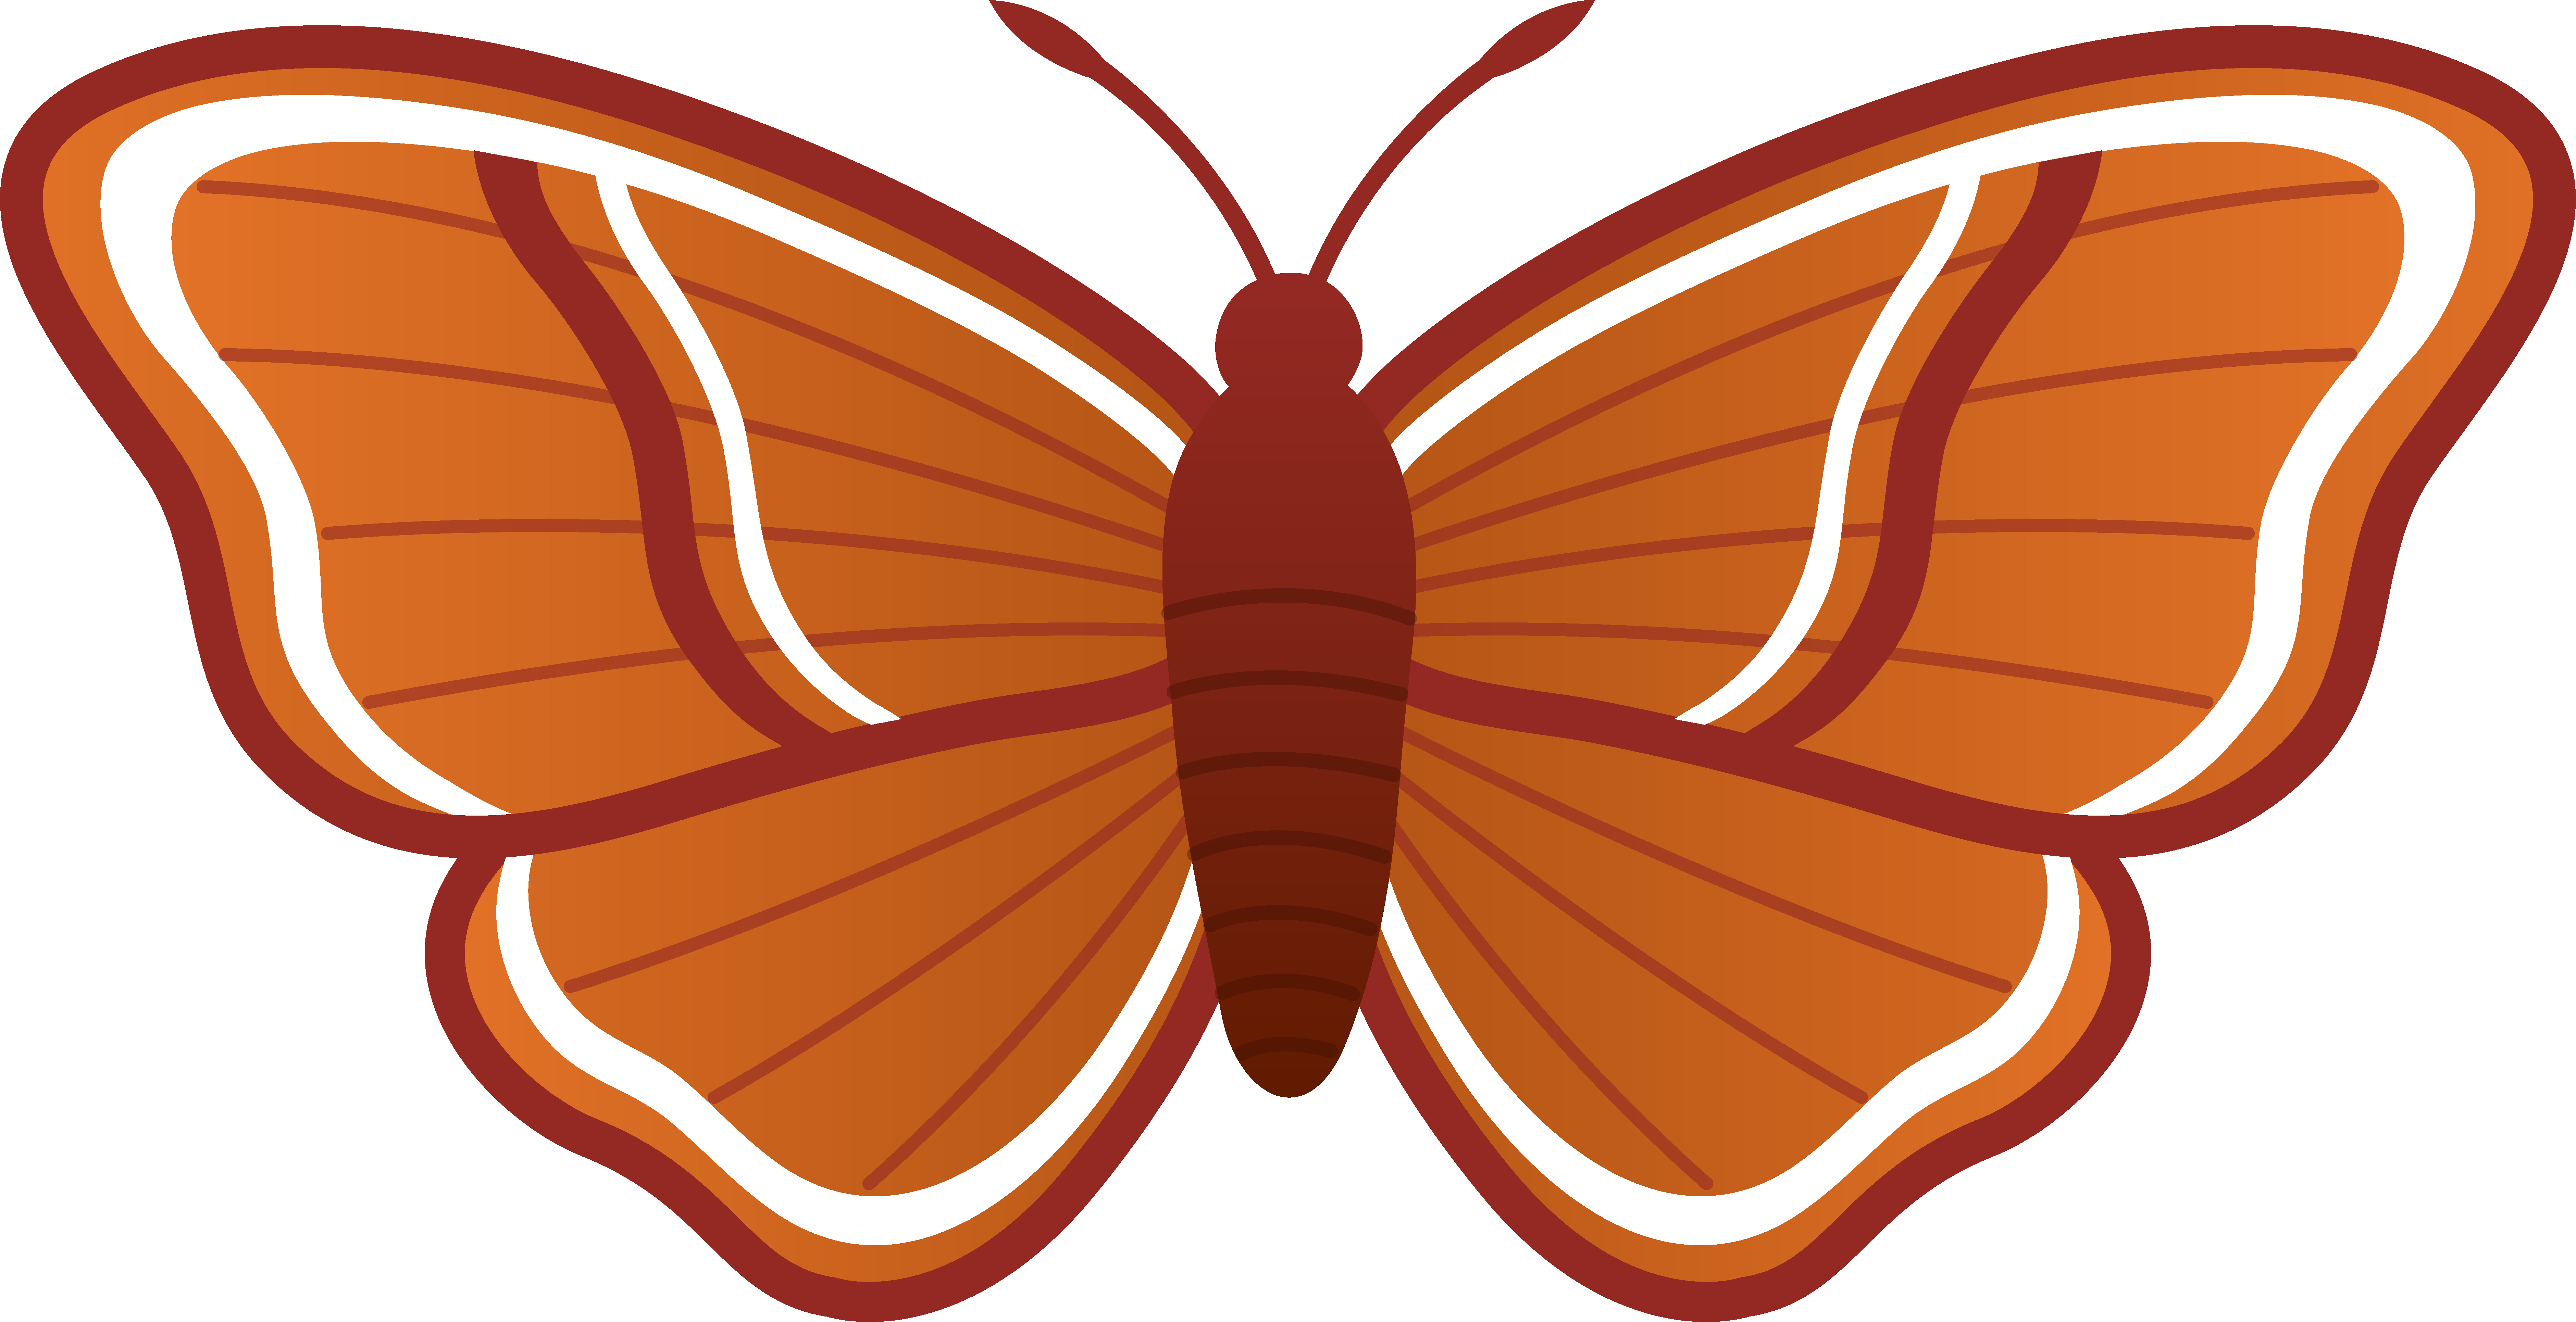 A Butterfly With White And Orange Wings